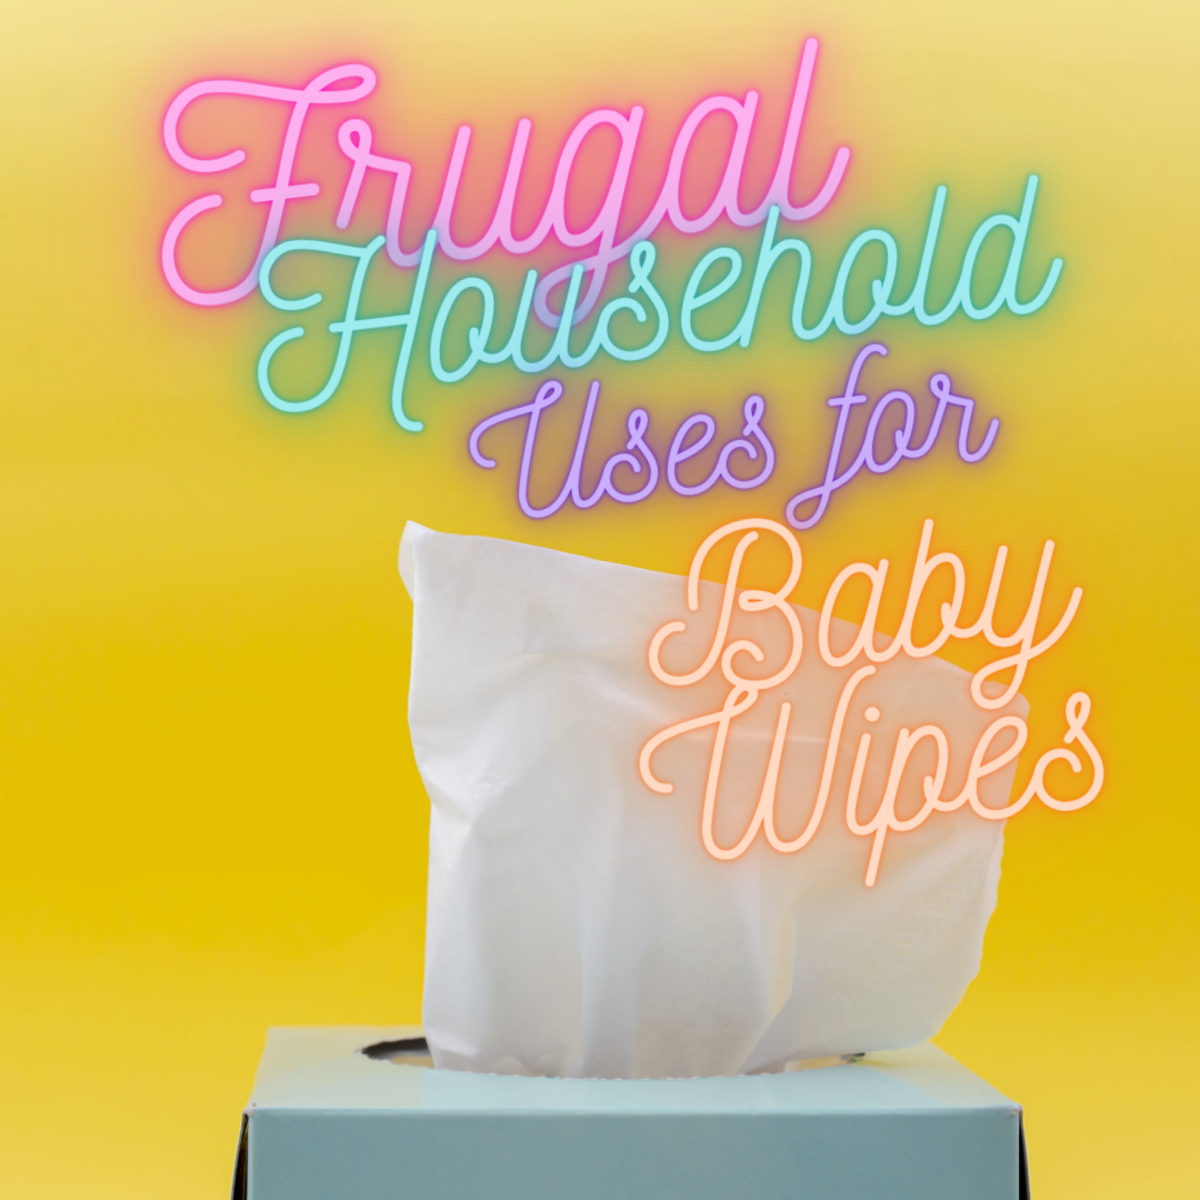 13+ Unexpected Household Uses for Baby Wipes